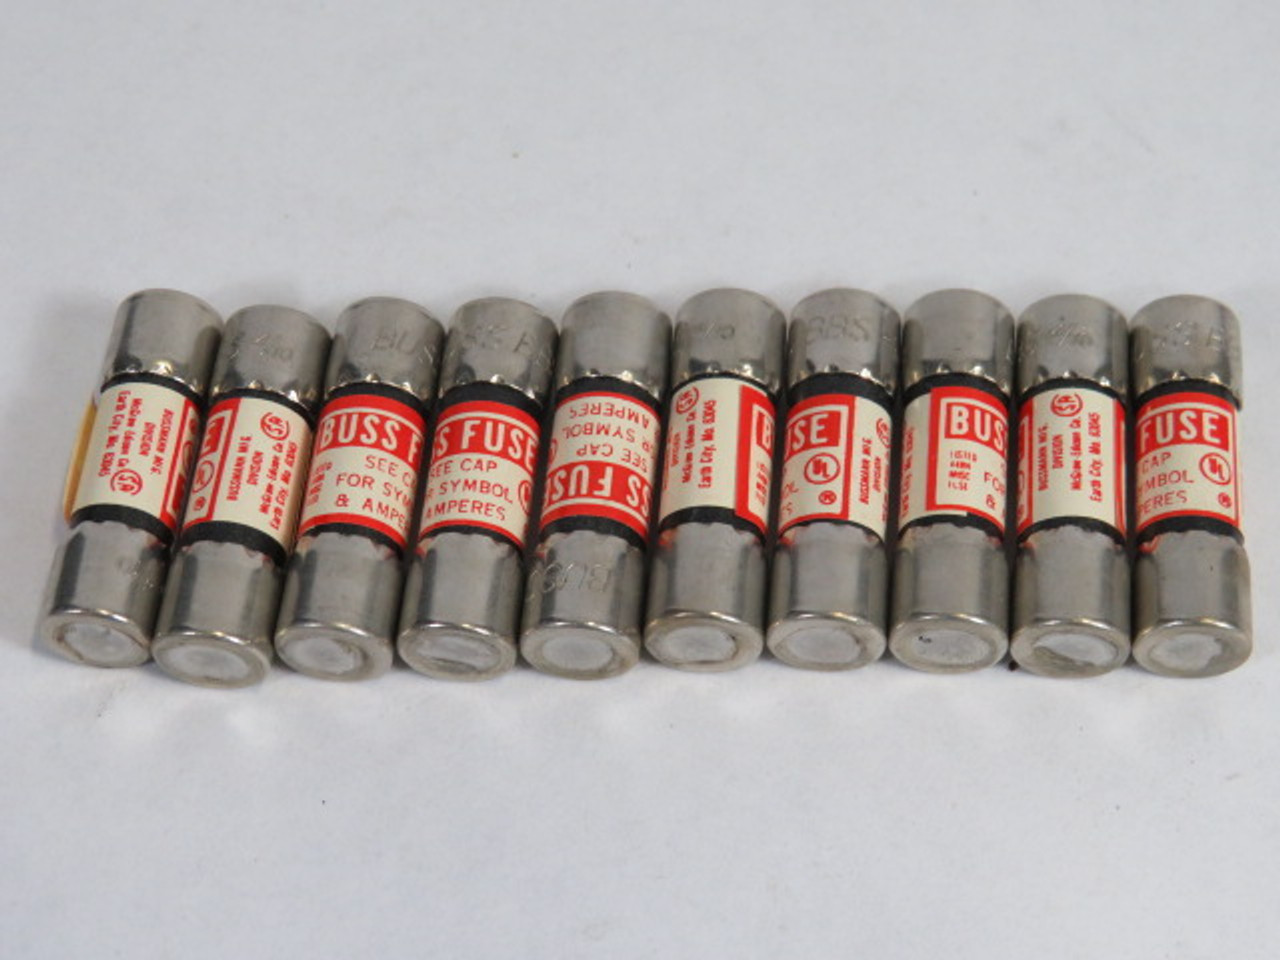 Bussmann BBS-4/10 Fast Acting Fuse 400mA 600V 10-Pack ! NEW !